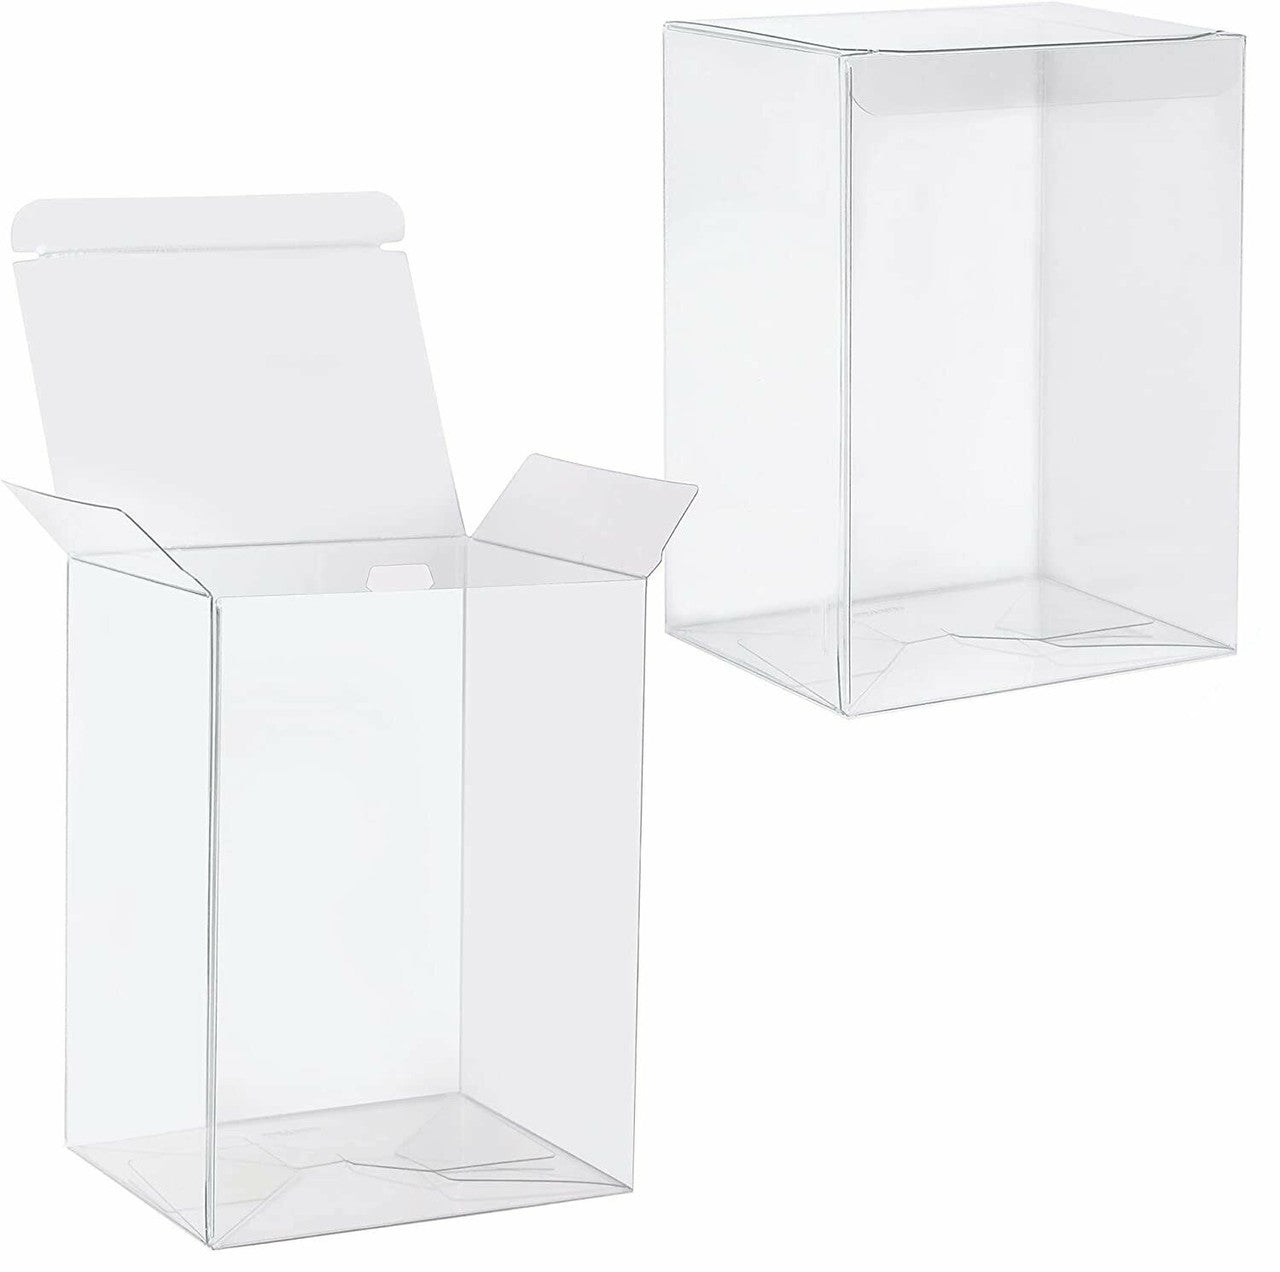 10 Pack of Large Plastic 22x14.5cm Rectangle Cube Box - Exhibition Gift Product Showcase Clear Plastic Shop Display Storage Packaging Box | Auzzi Store